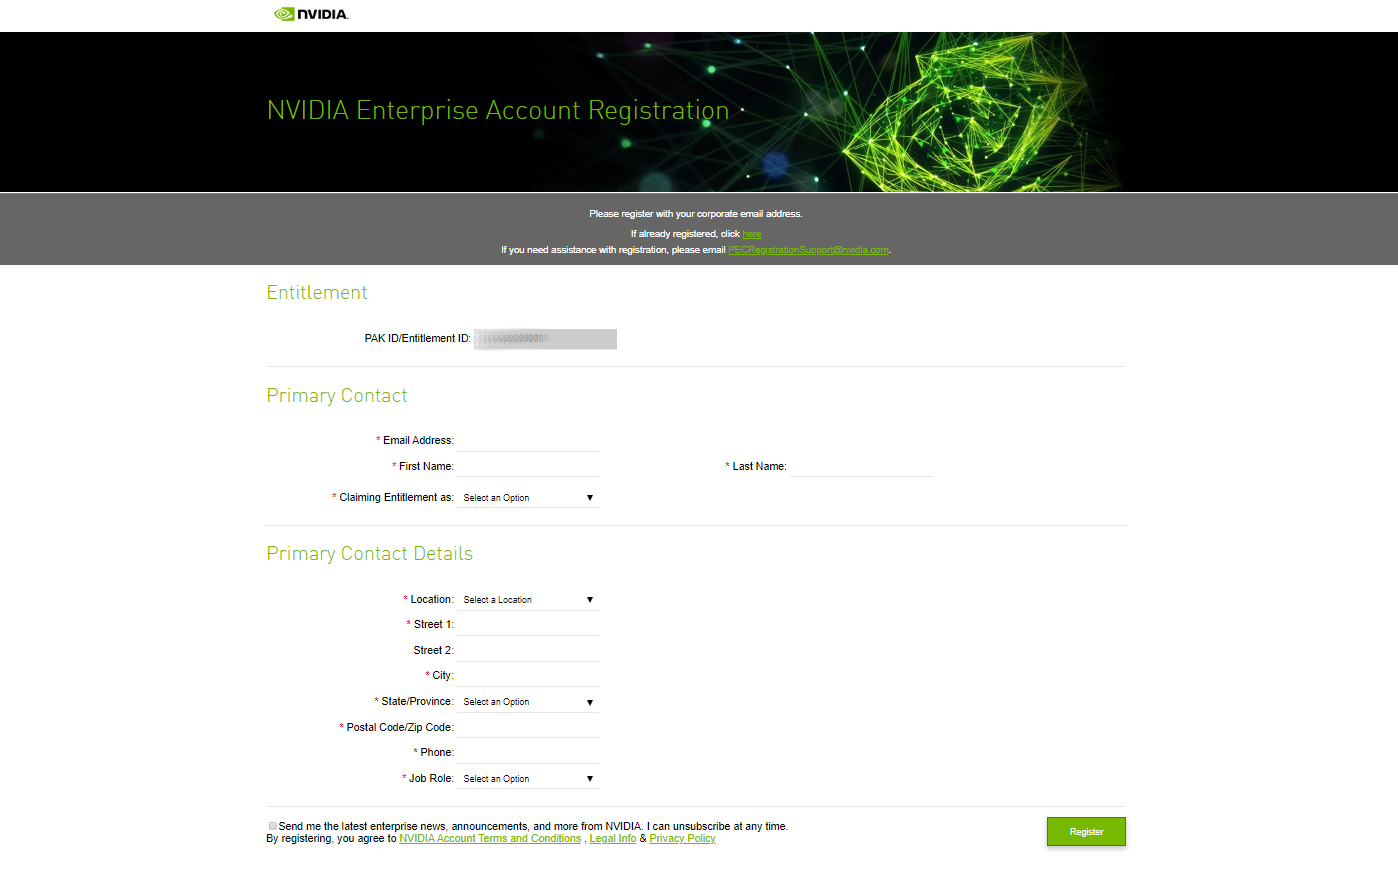 Screen capture showing the NVIDIA Enterprise Account Registration page.